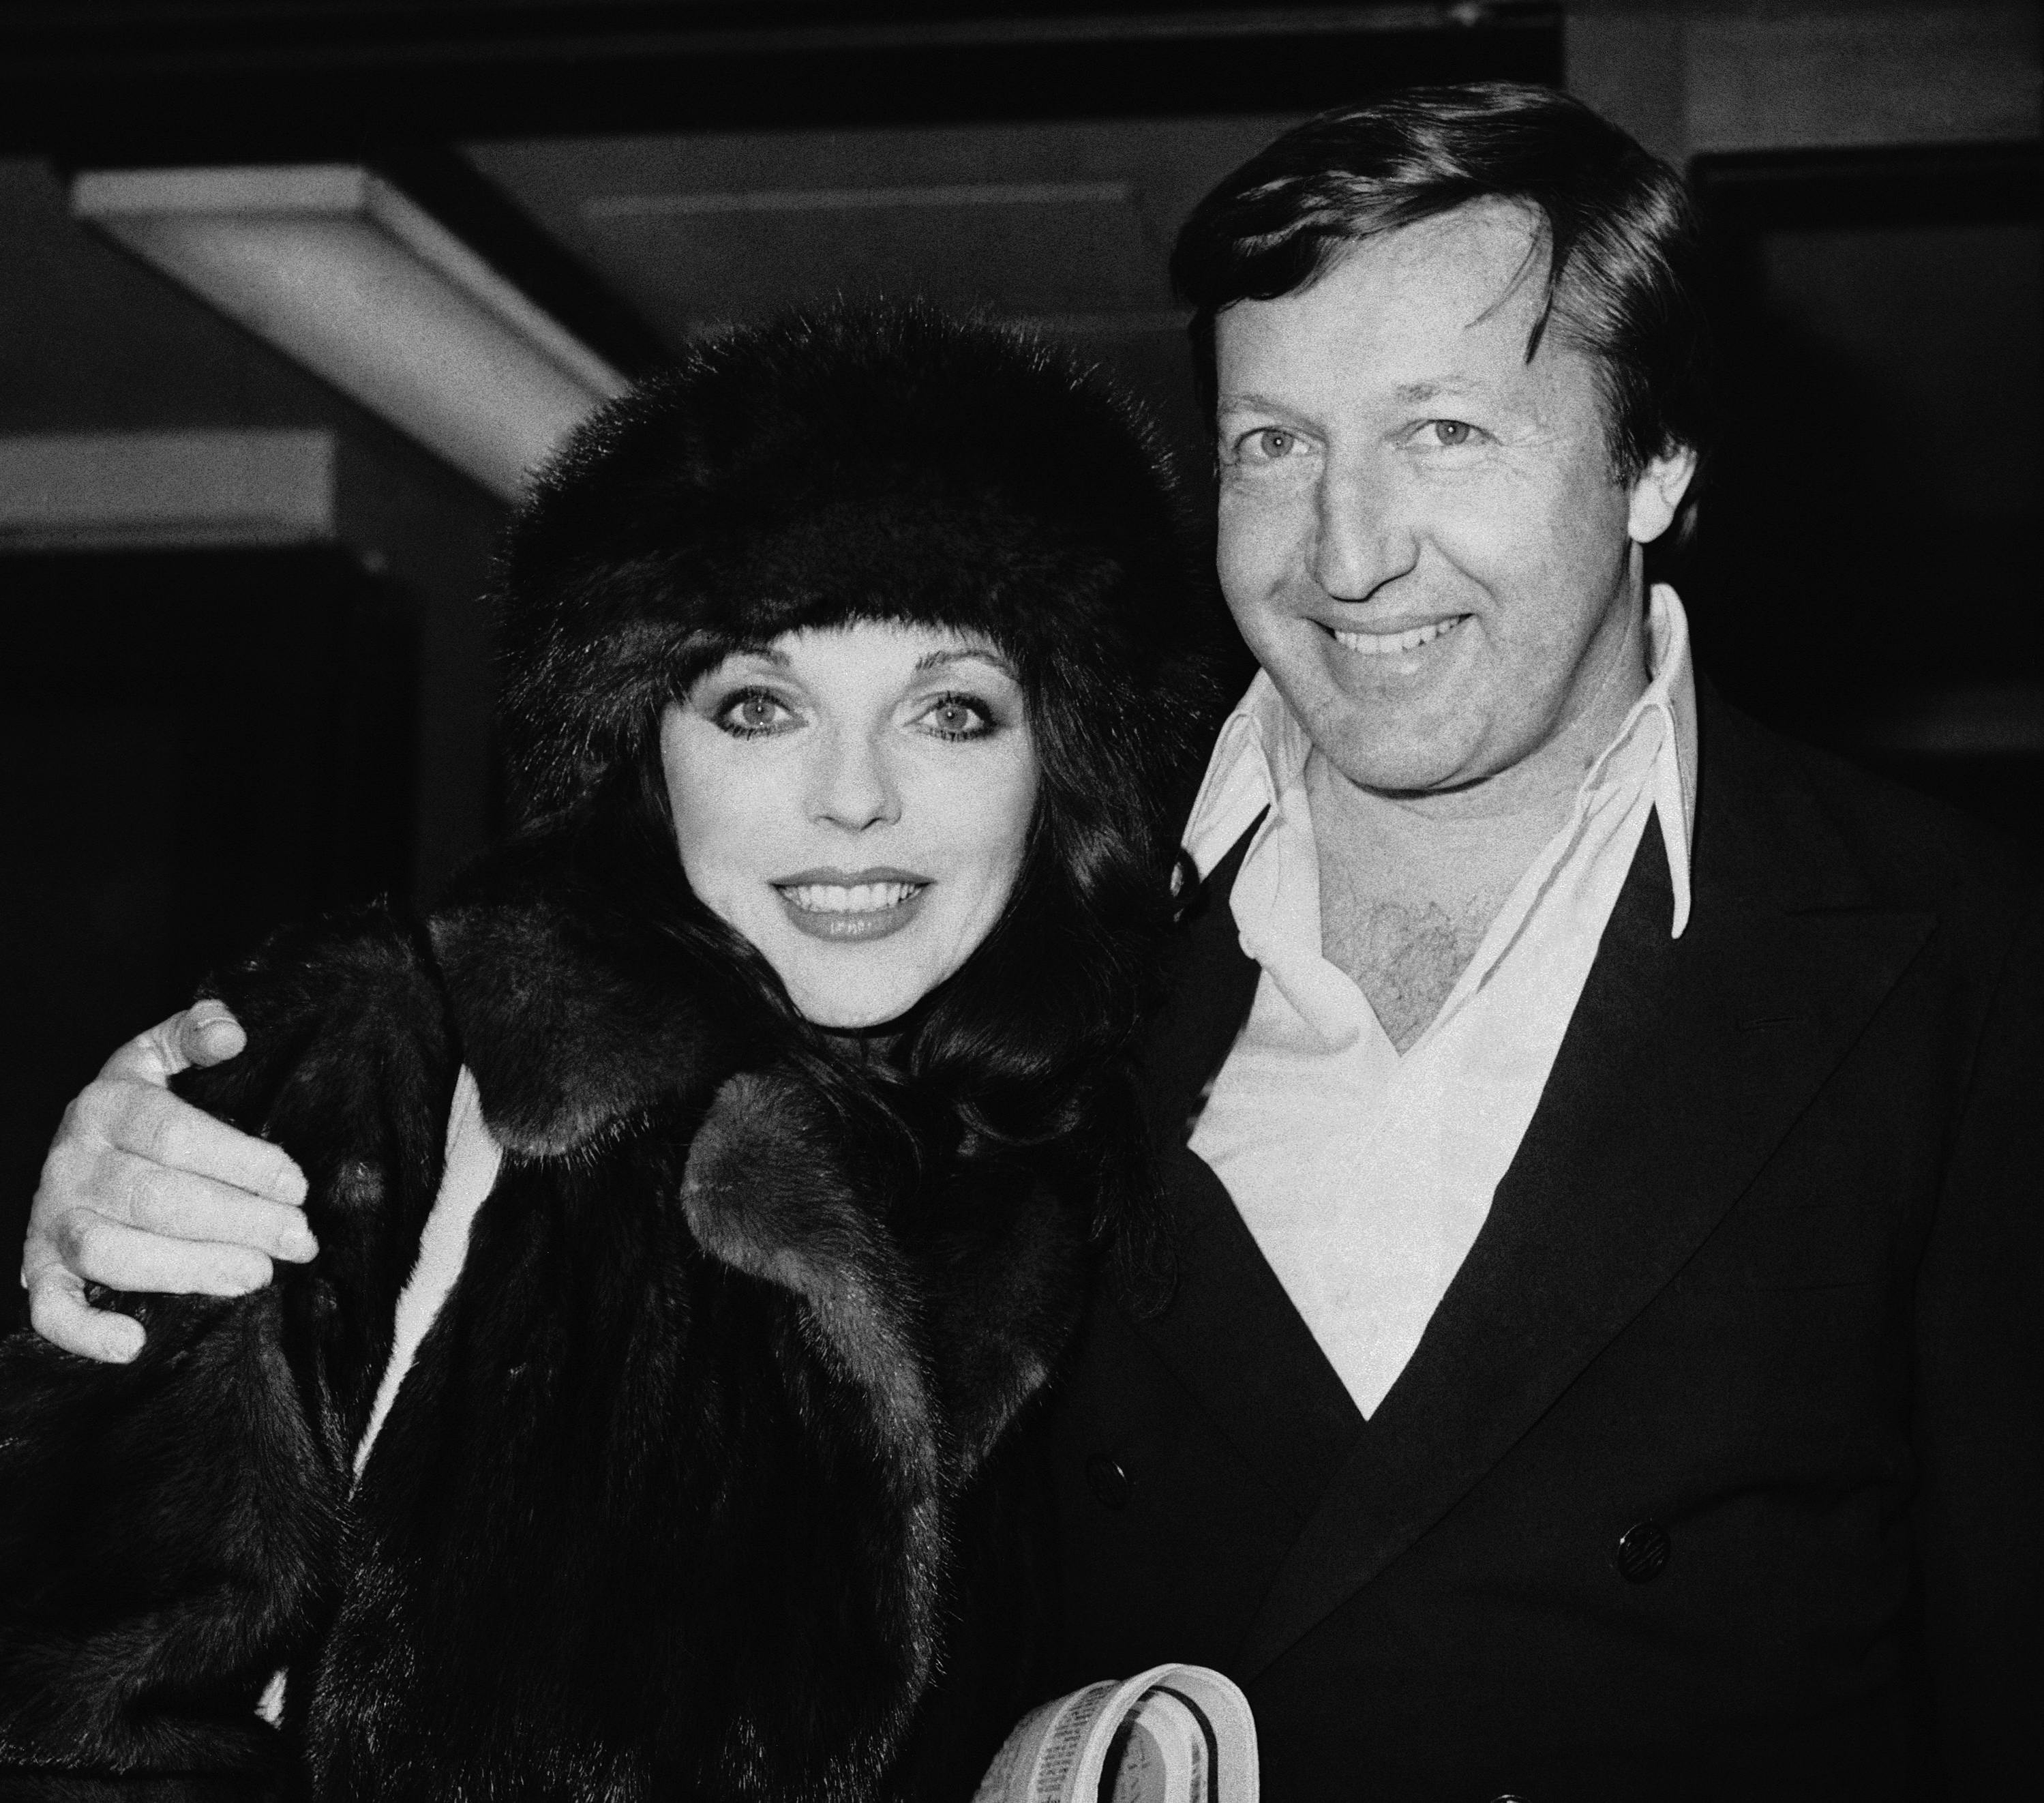 Actress Joan Collins, left, and film producer husband Ron Kass arrive at London's Heathrow Airport from Los Angeles, Feb. 16, 1978, London, England. (AP Photo)